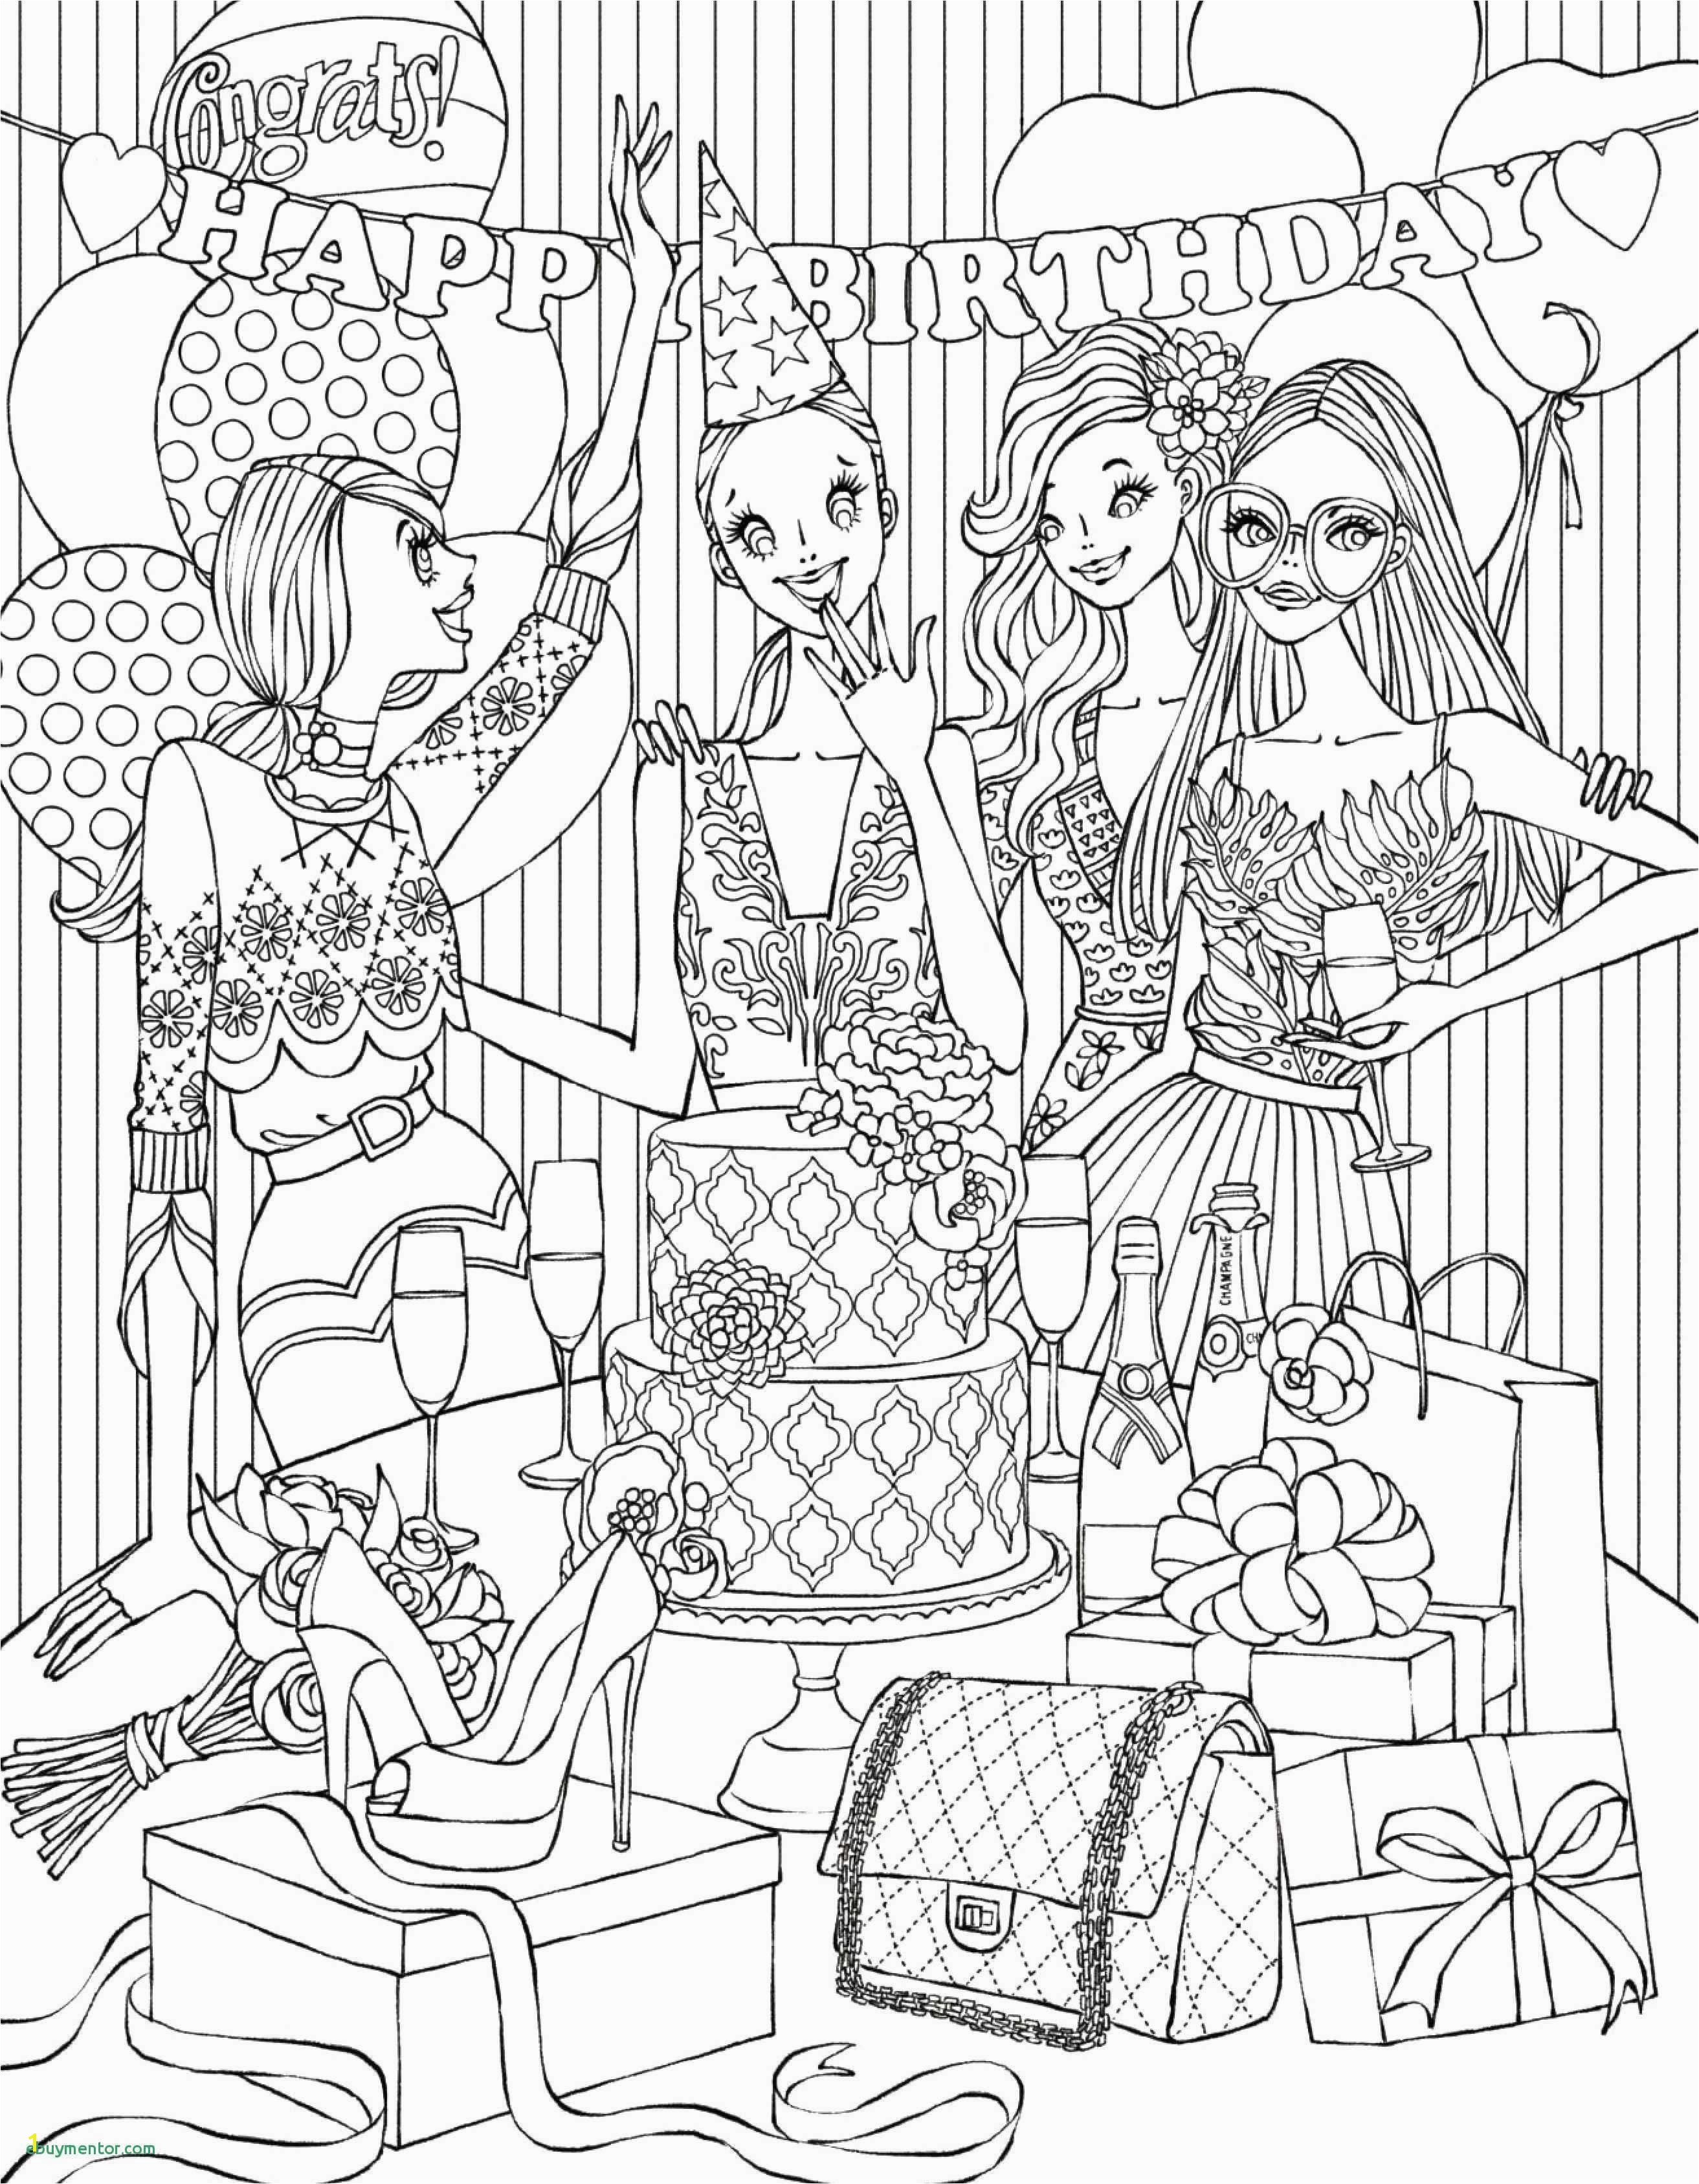 Free Coloring Pages for Christmas 24 Christmas Coloring for Free